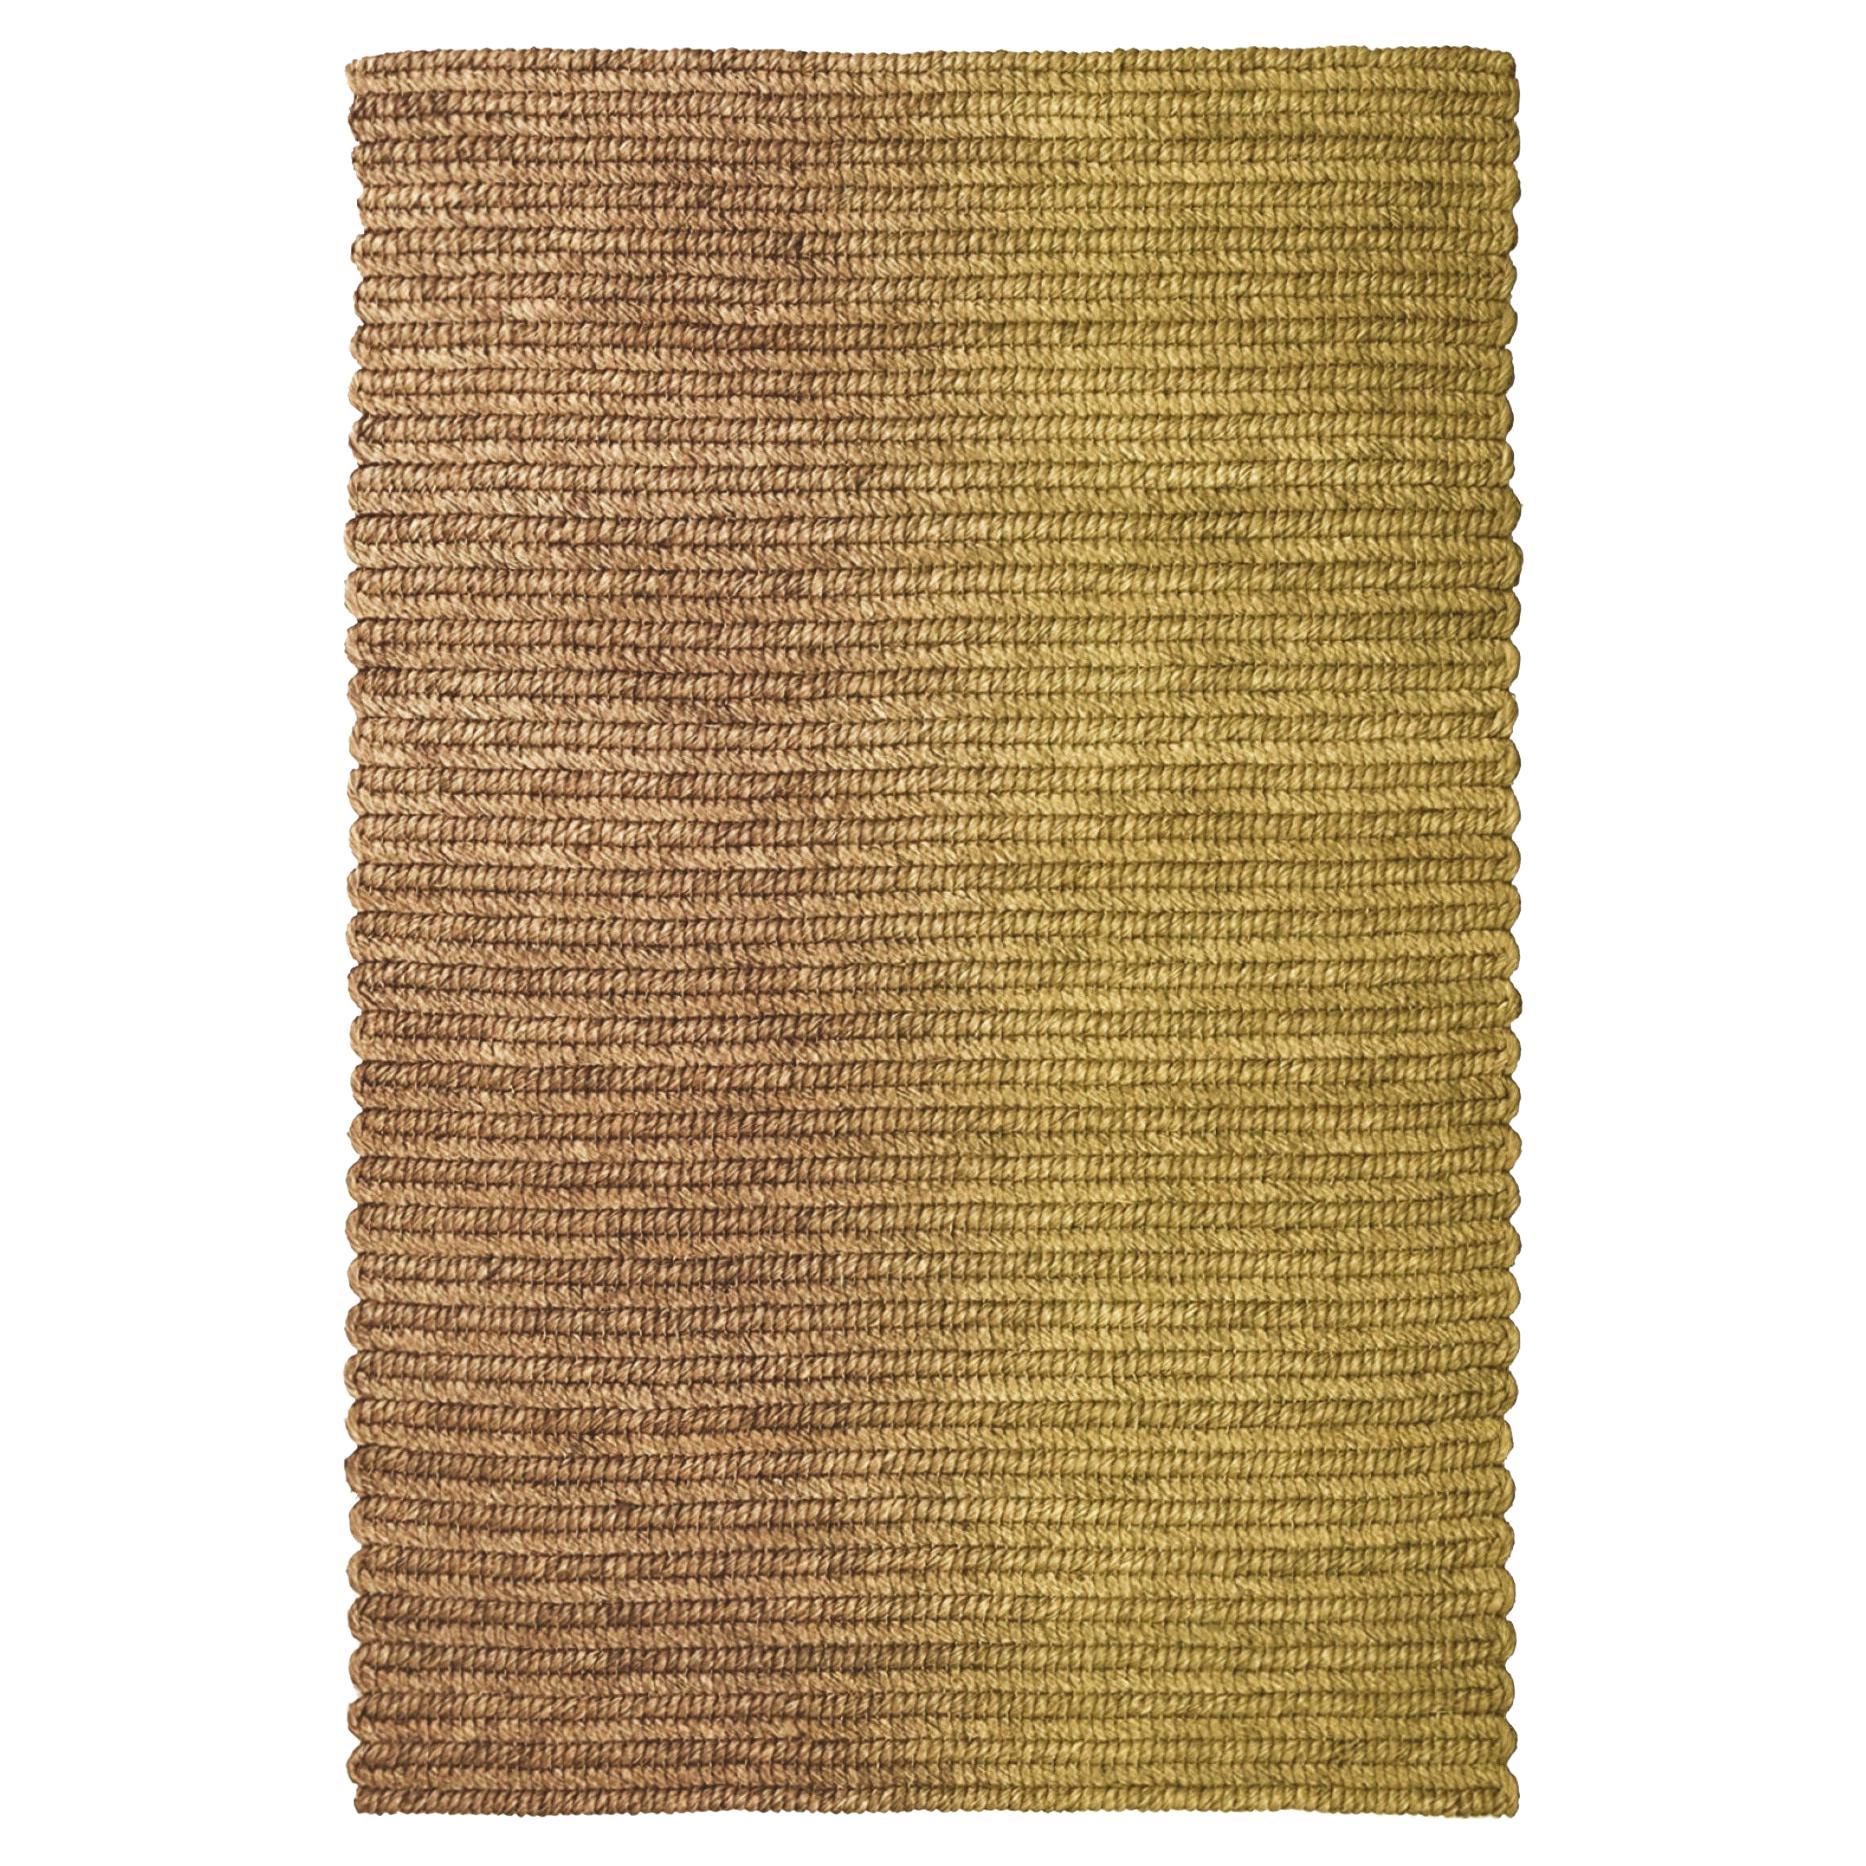 'Switch' Rug in Abaca, 'Spice', by Claire Vos for Musett Design